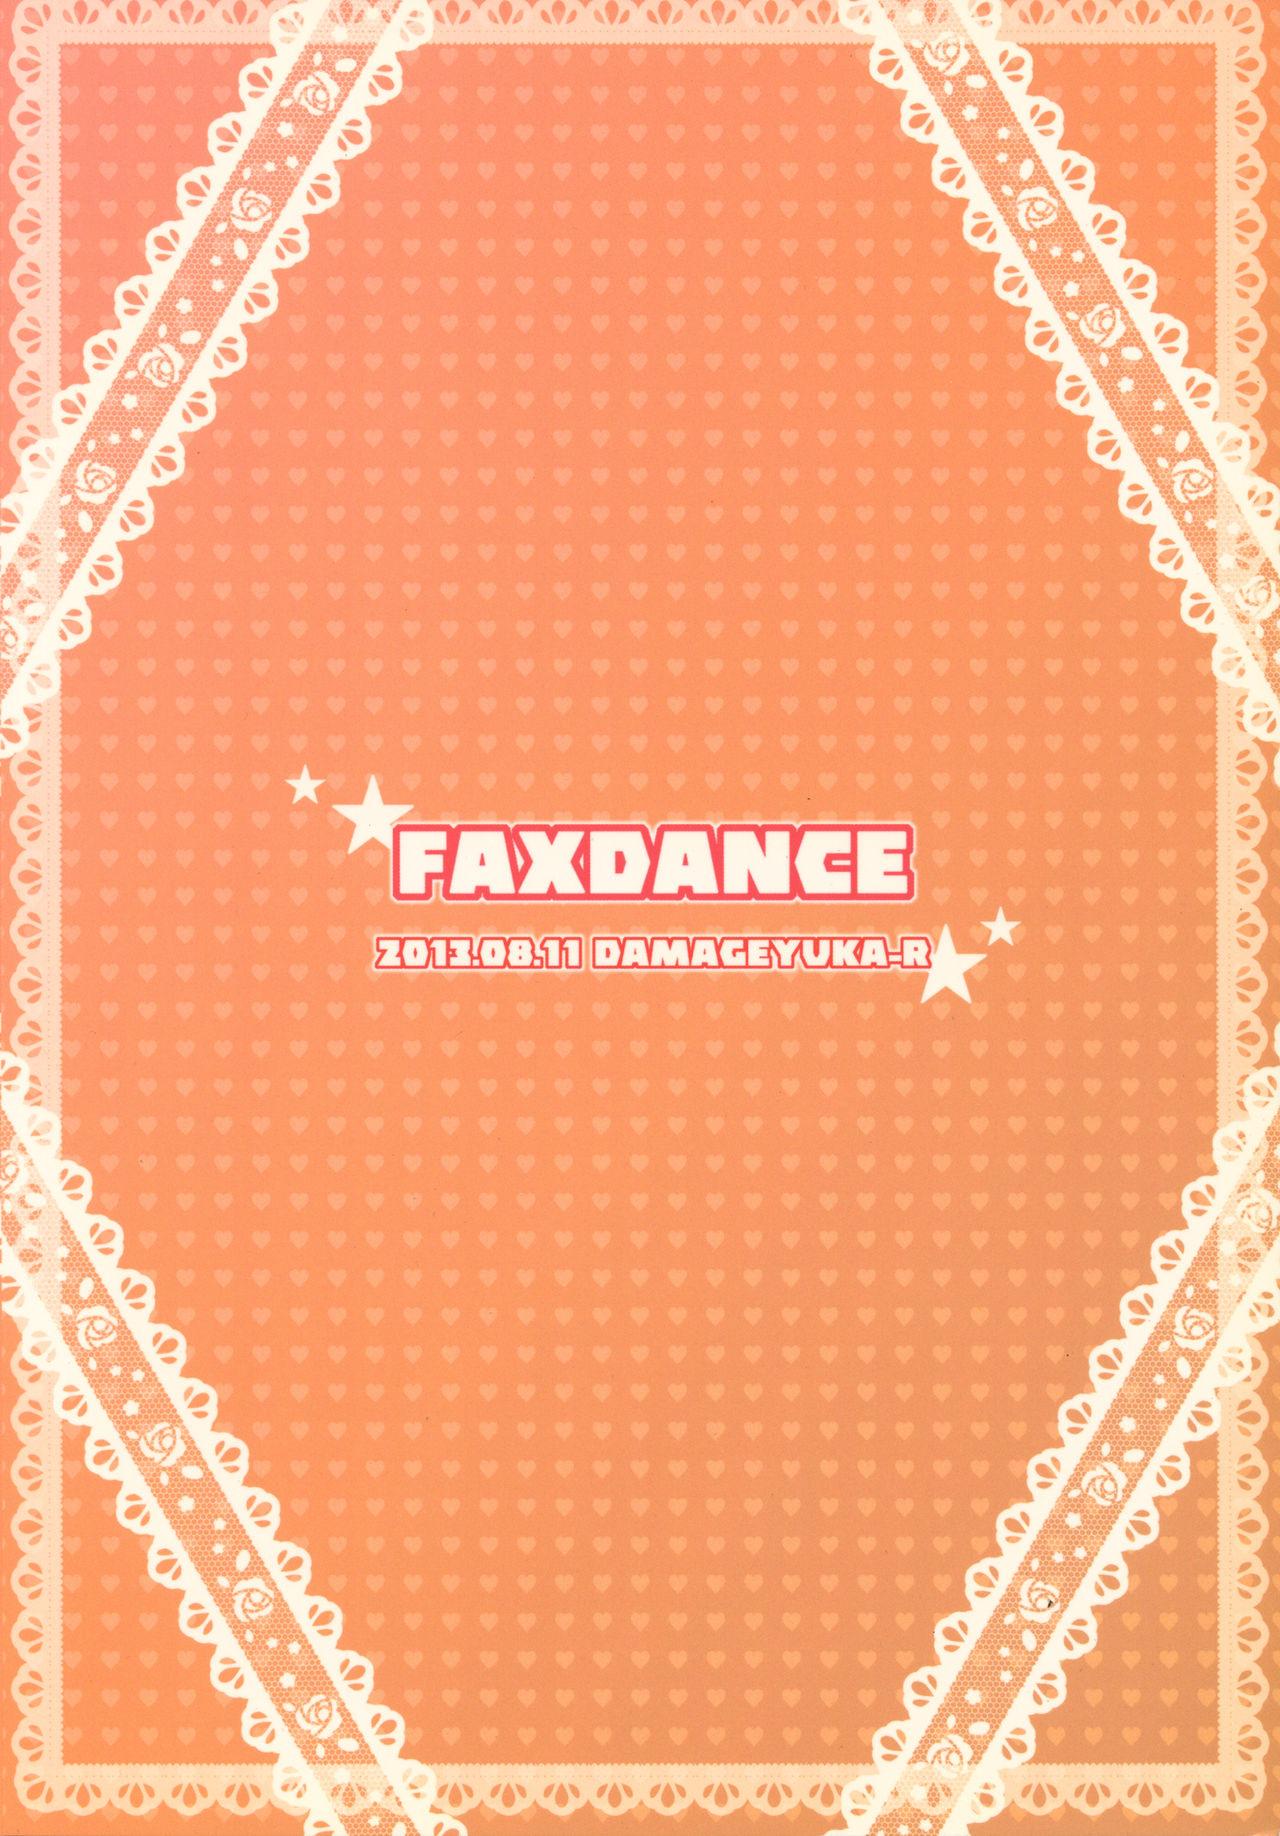 FAXDANCE 17